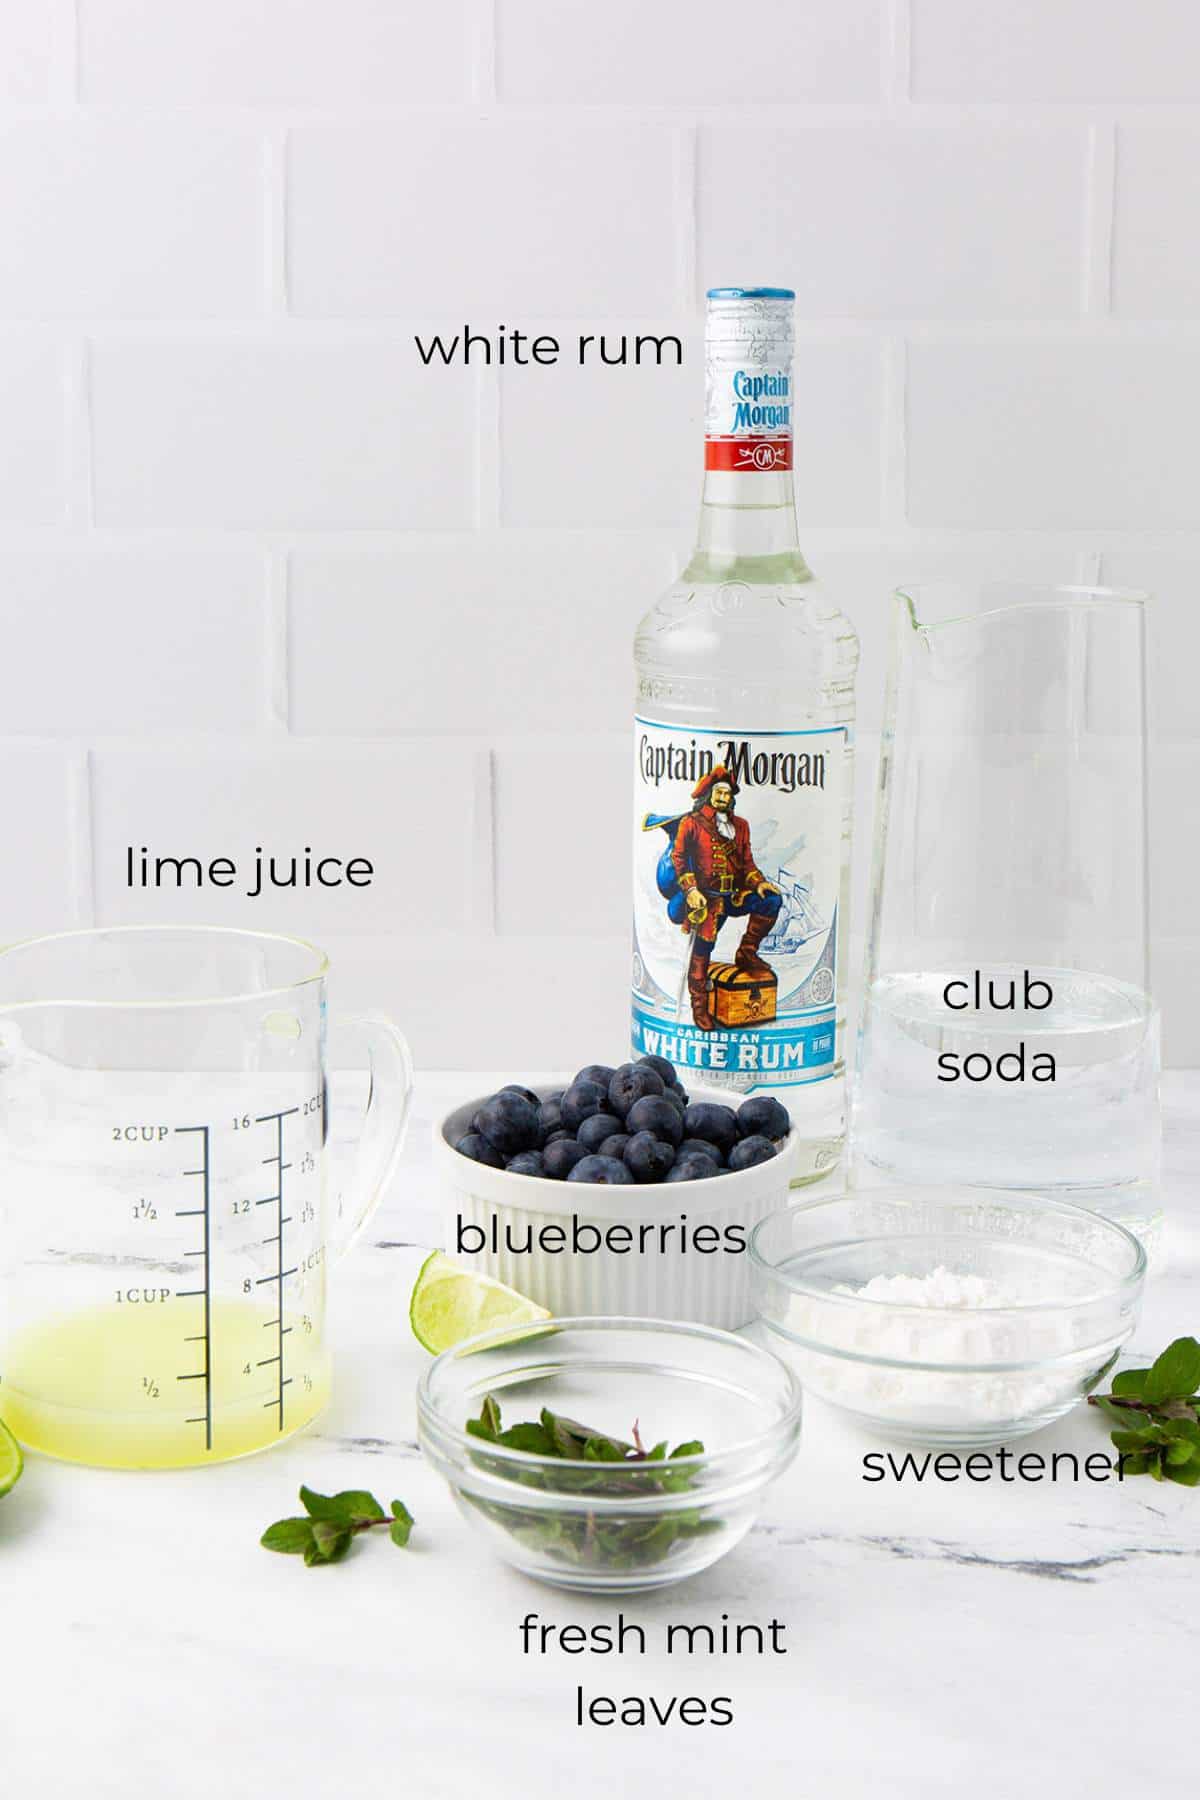 Labeled ingredients for skinny mojitos.